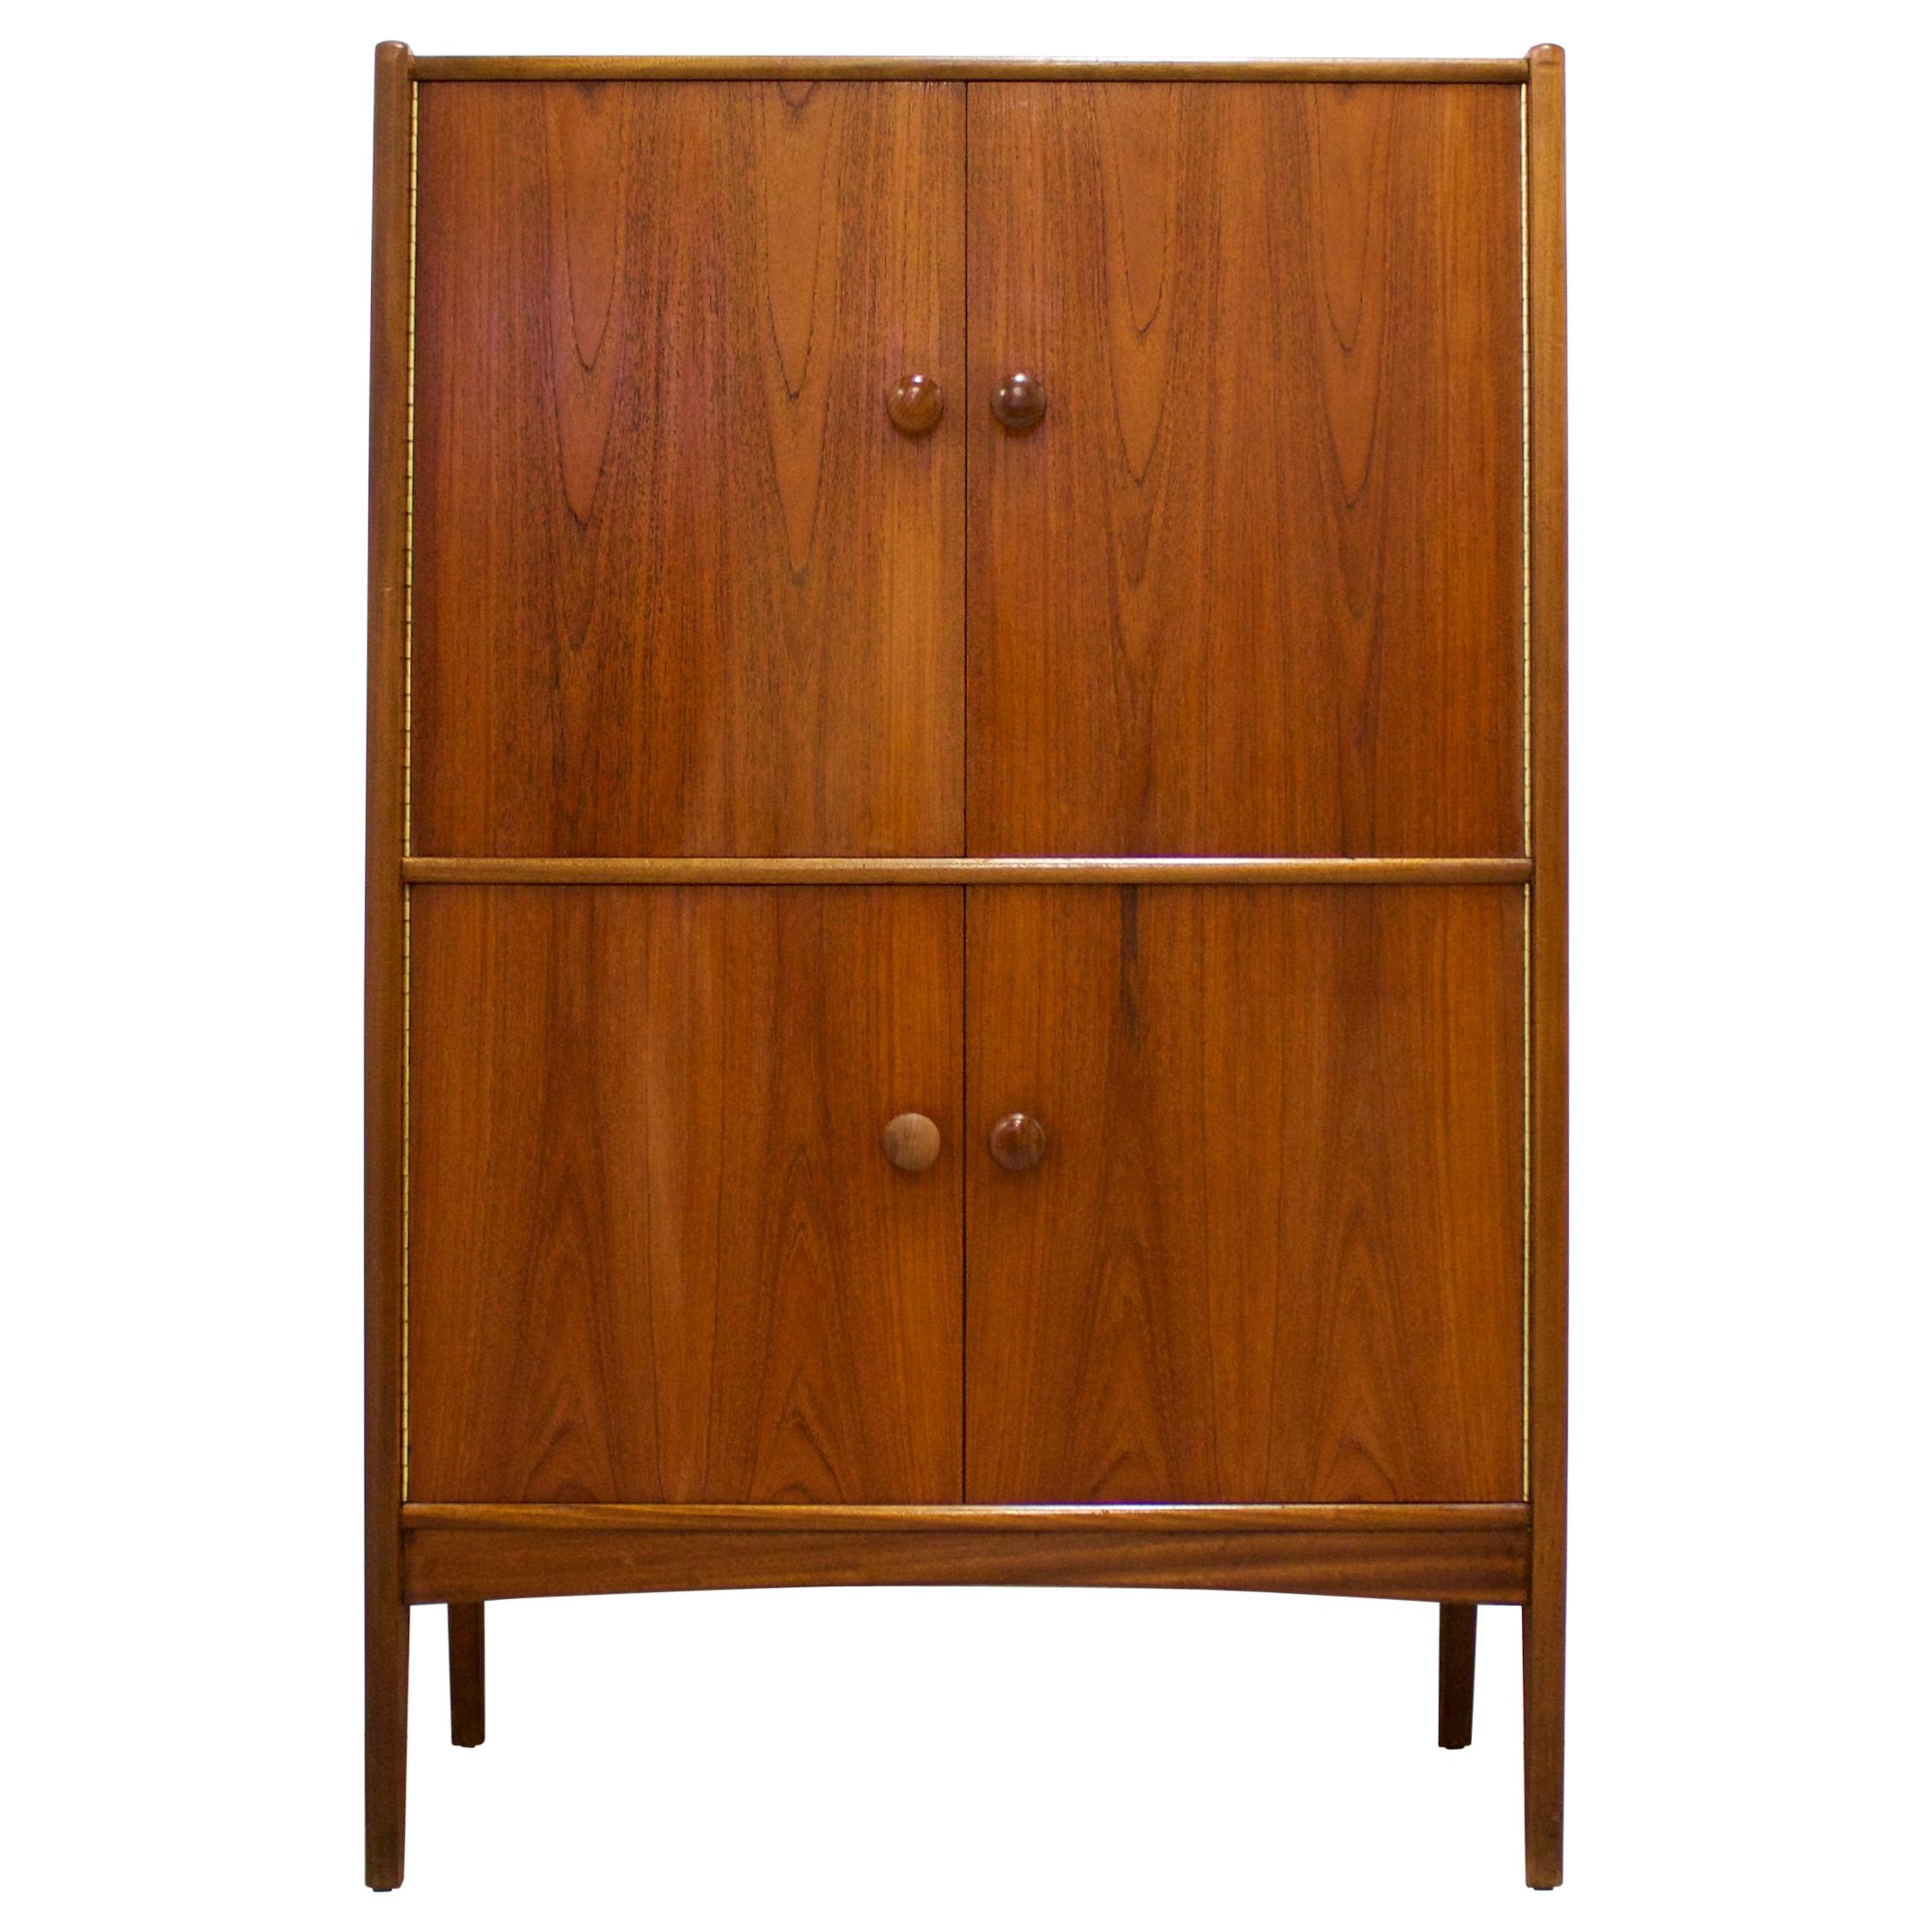 Midcentury Teak Drinks Cabinet from Younger, 1960s For Sale